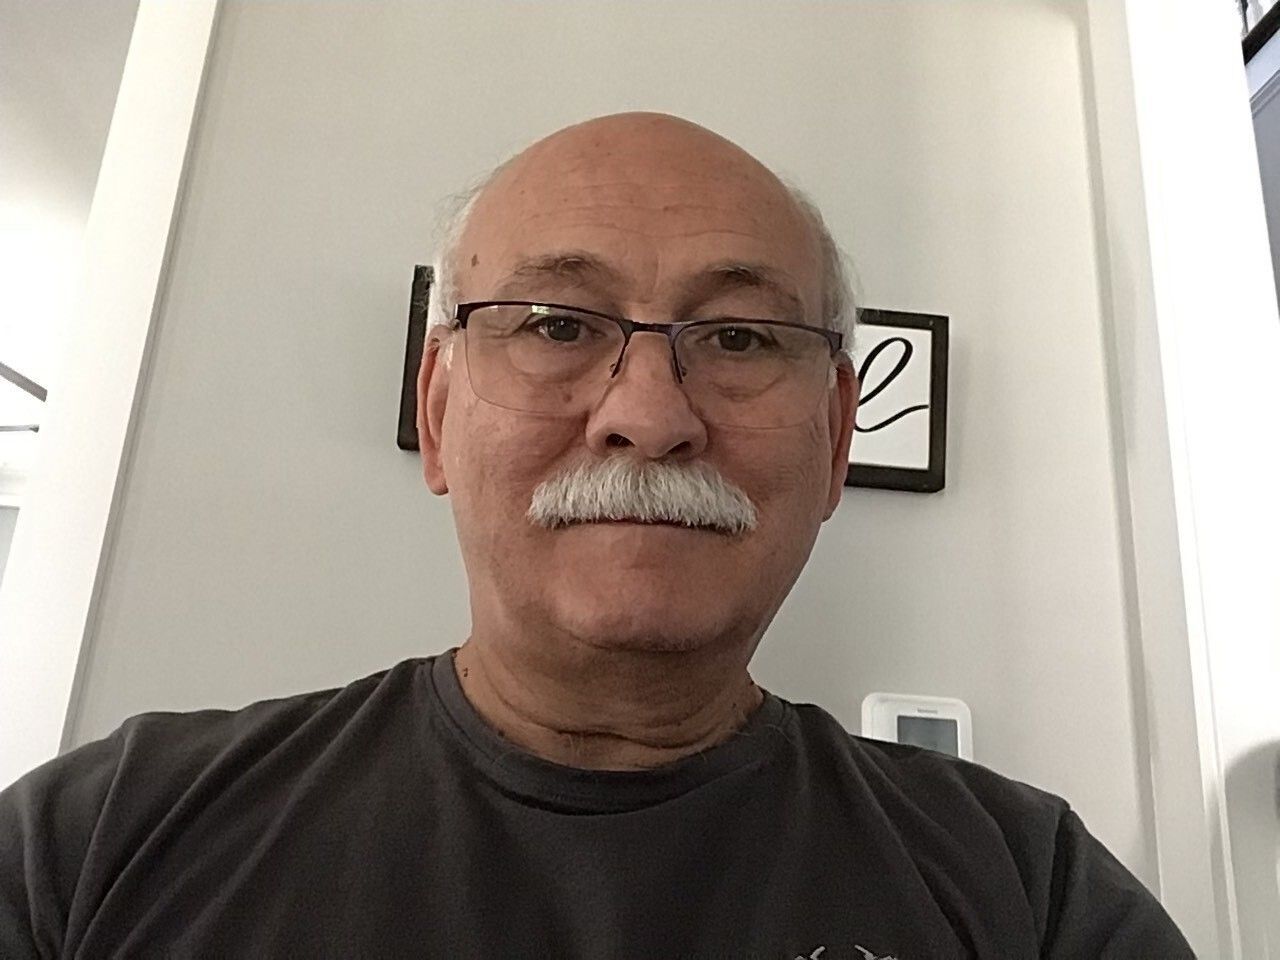 A selfie-style image of Gary Caruso, an older gentleman with a thick moustache and glasses who is wearing a black shirt.